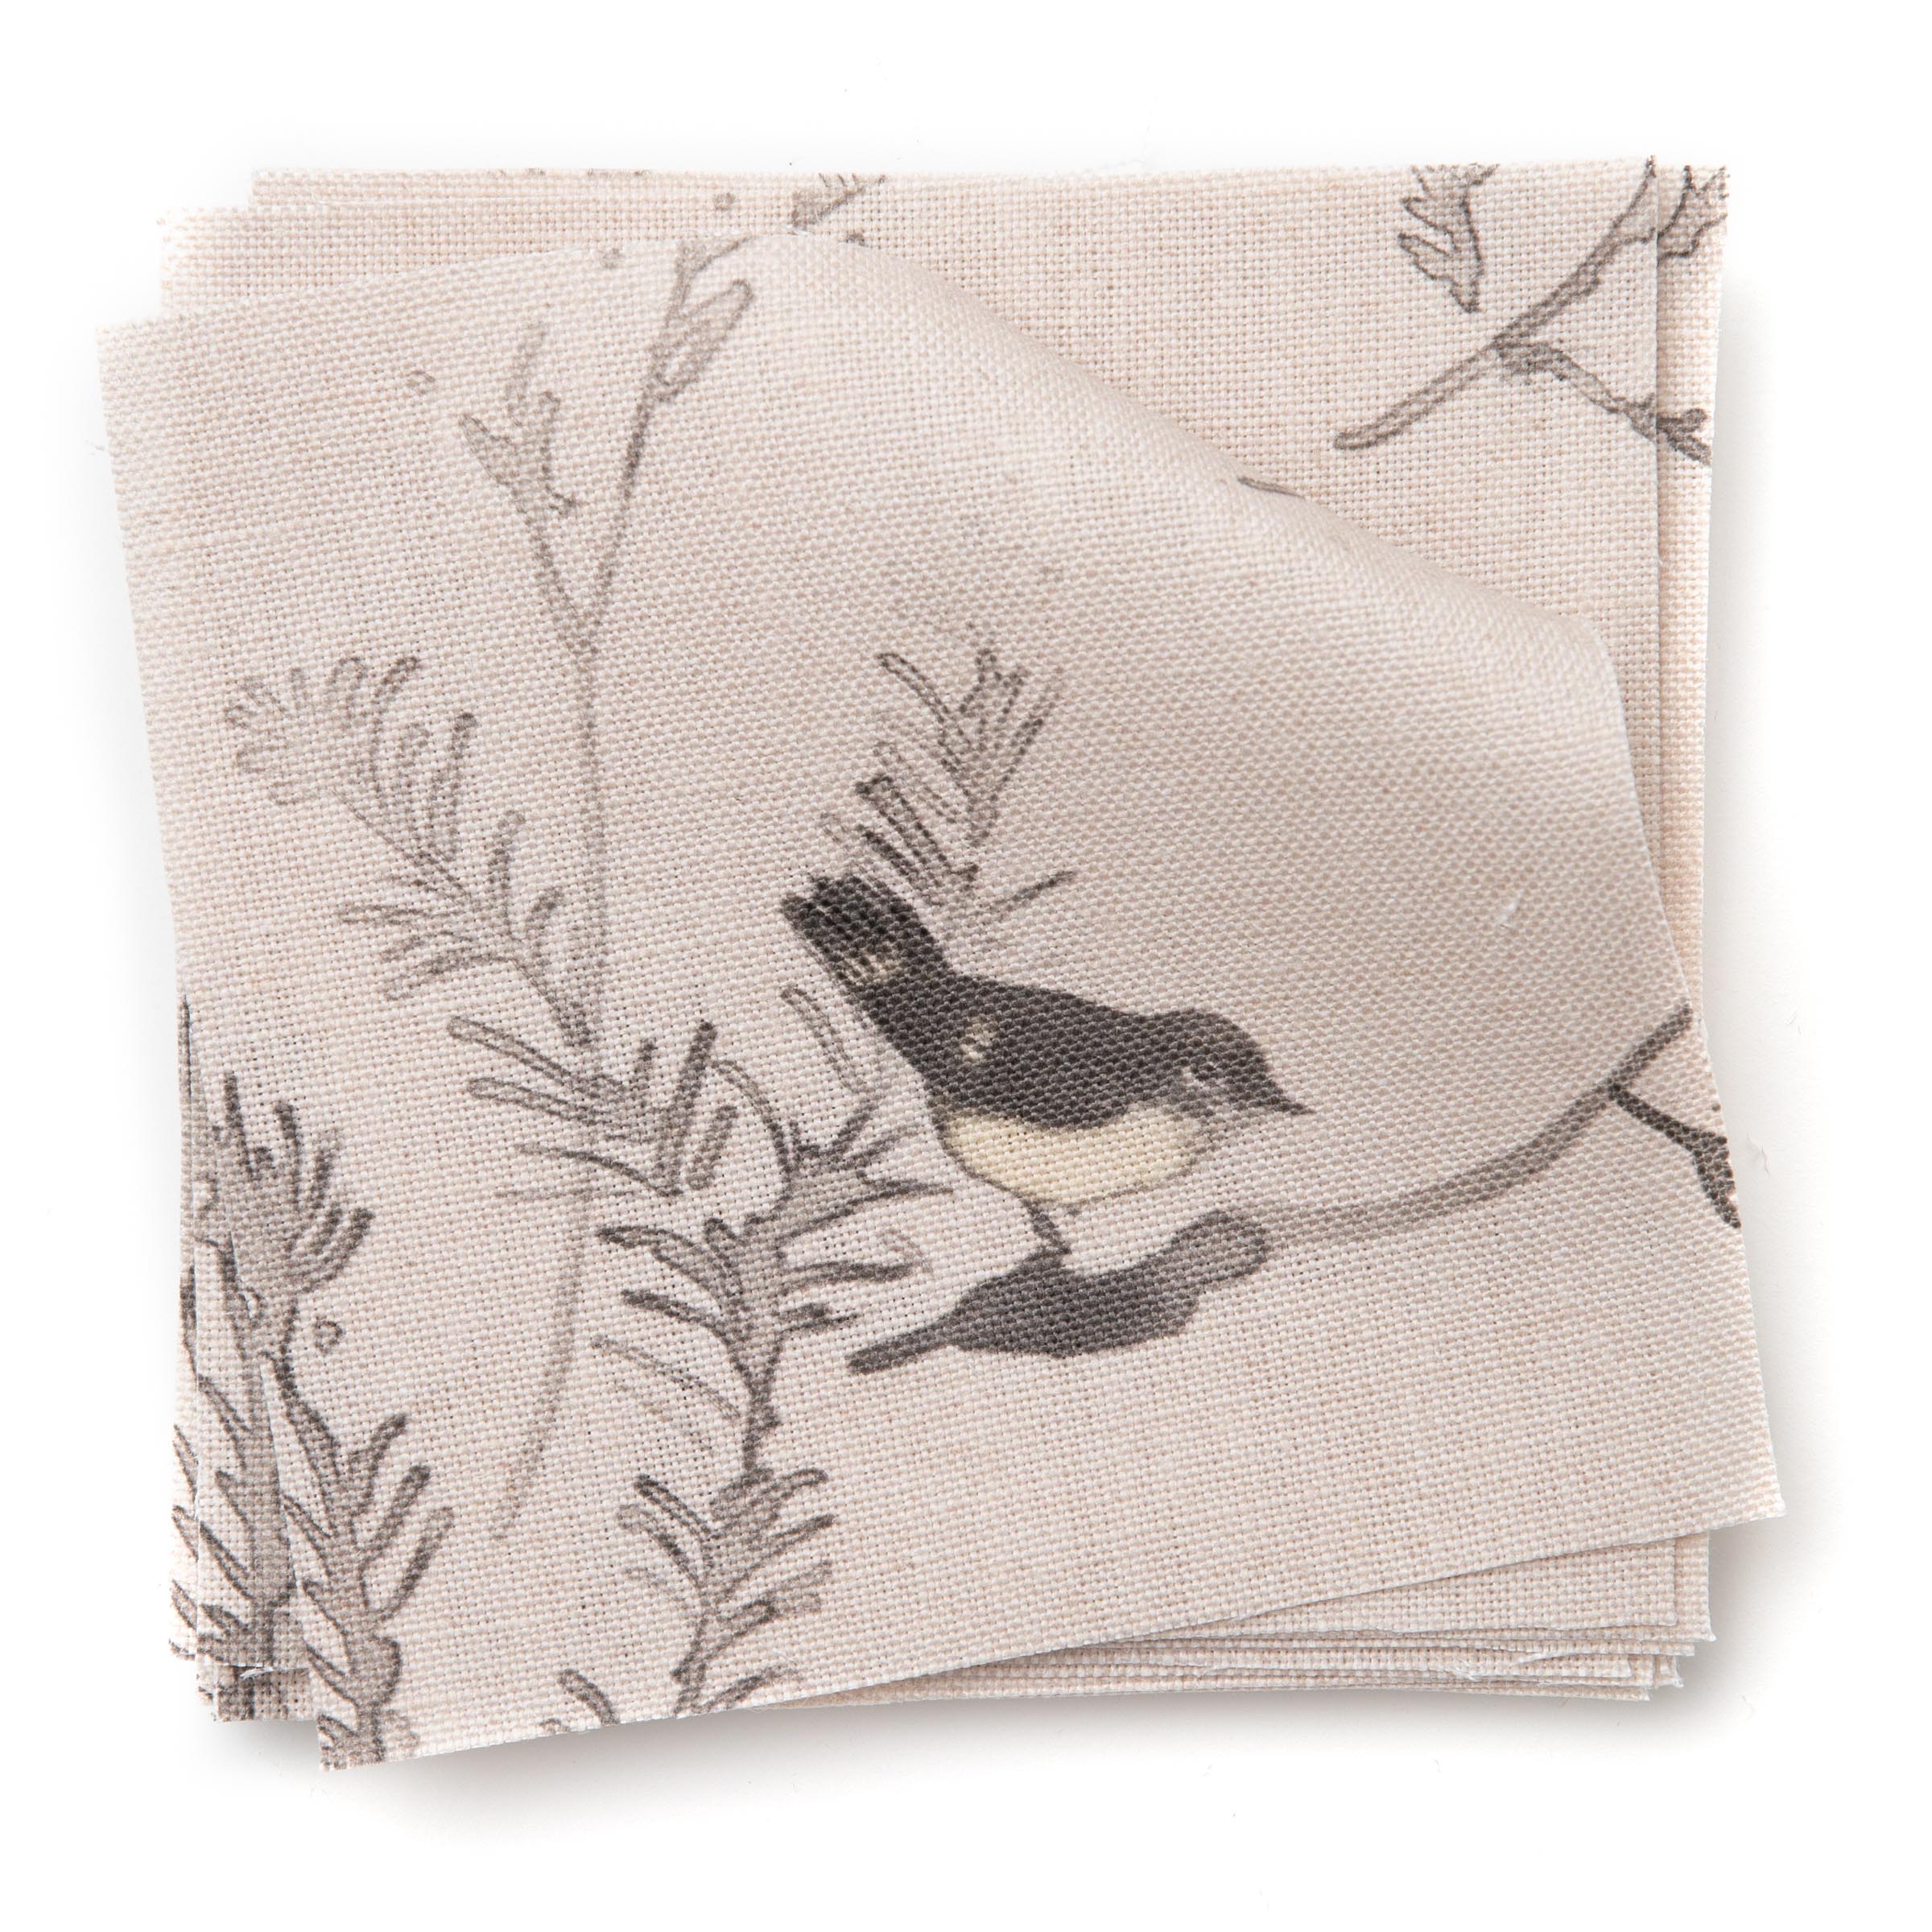 A stack of fabric swatches in a painterly bird and branch pattern in shades of gray on a light pink field.